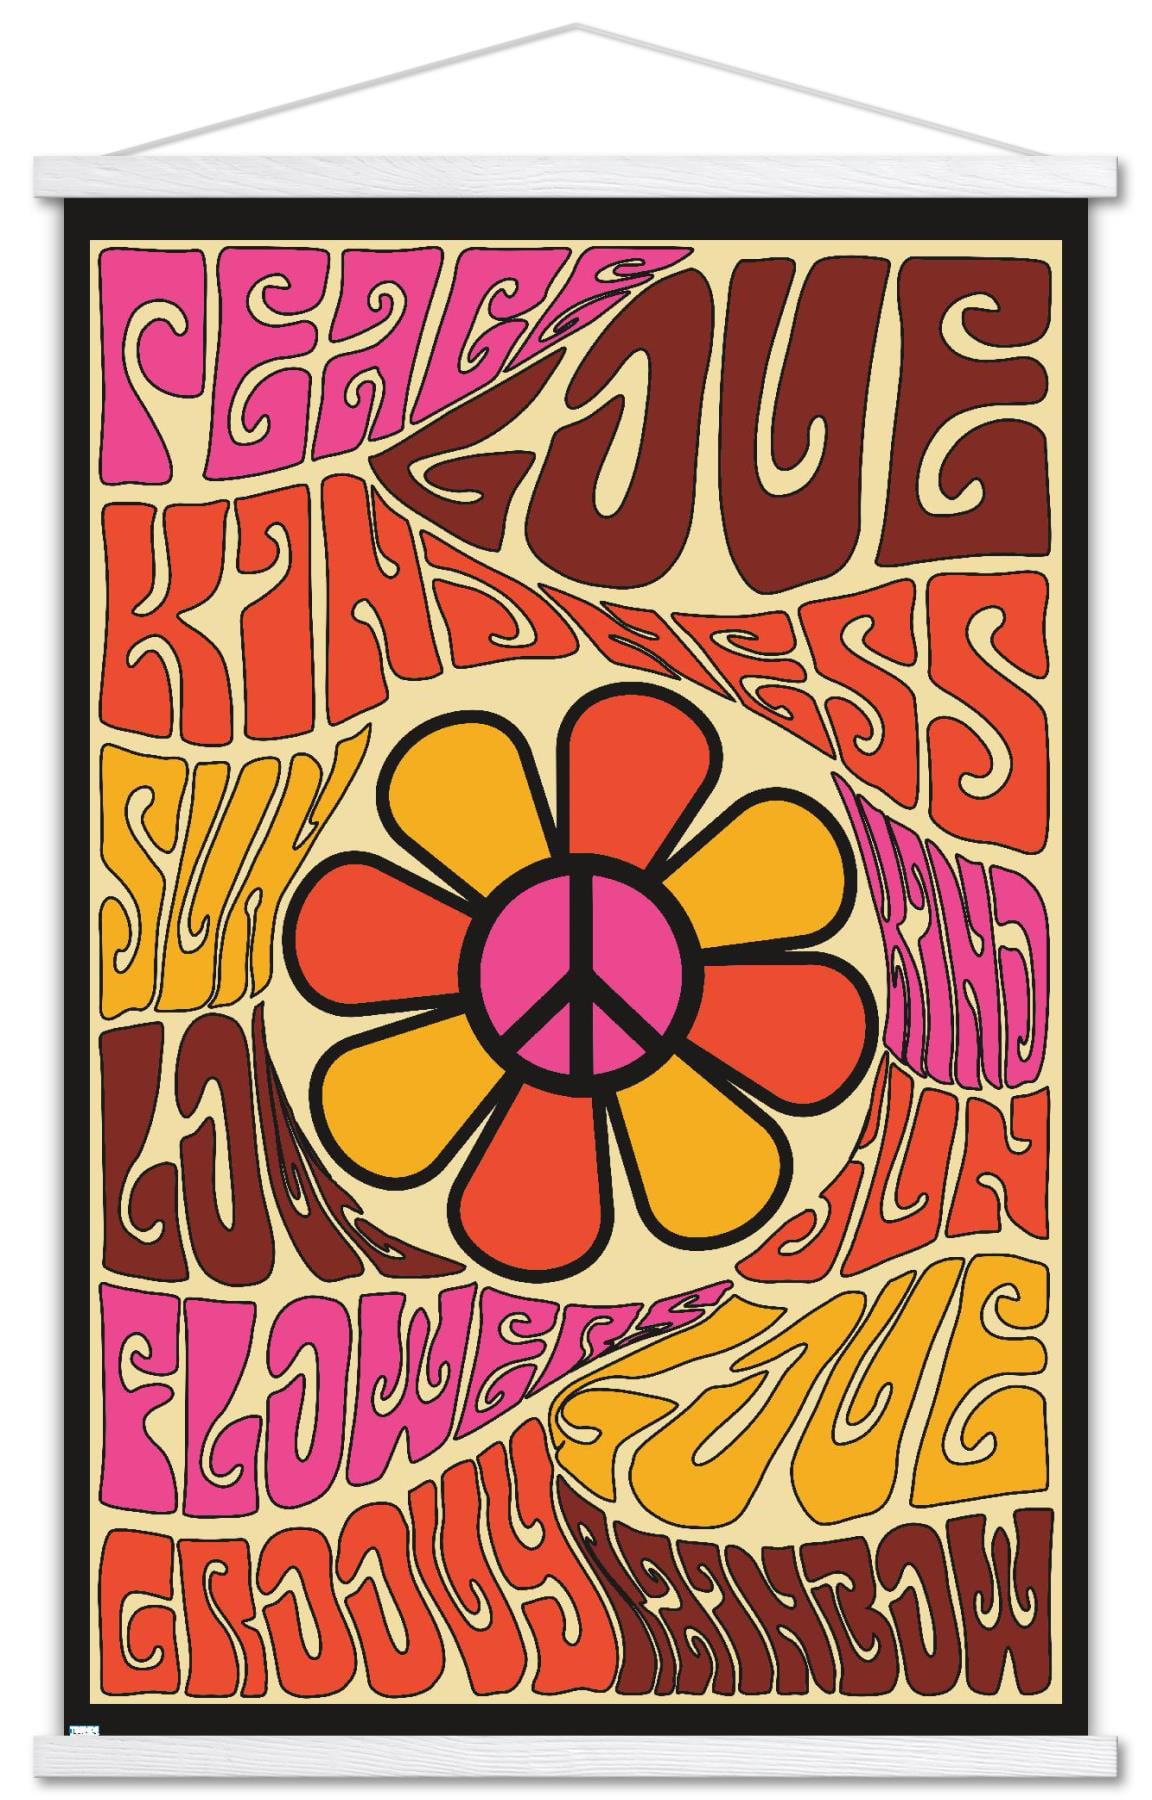 Giant Coloring Poster - Hippie, Peace & Love | 30 x 68.9